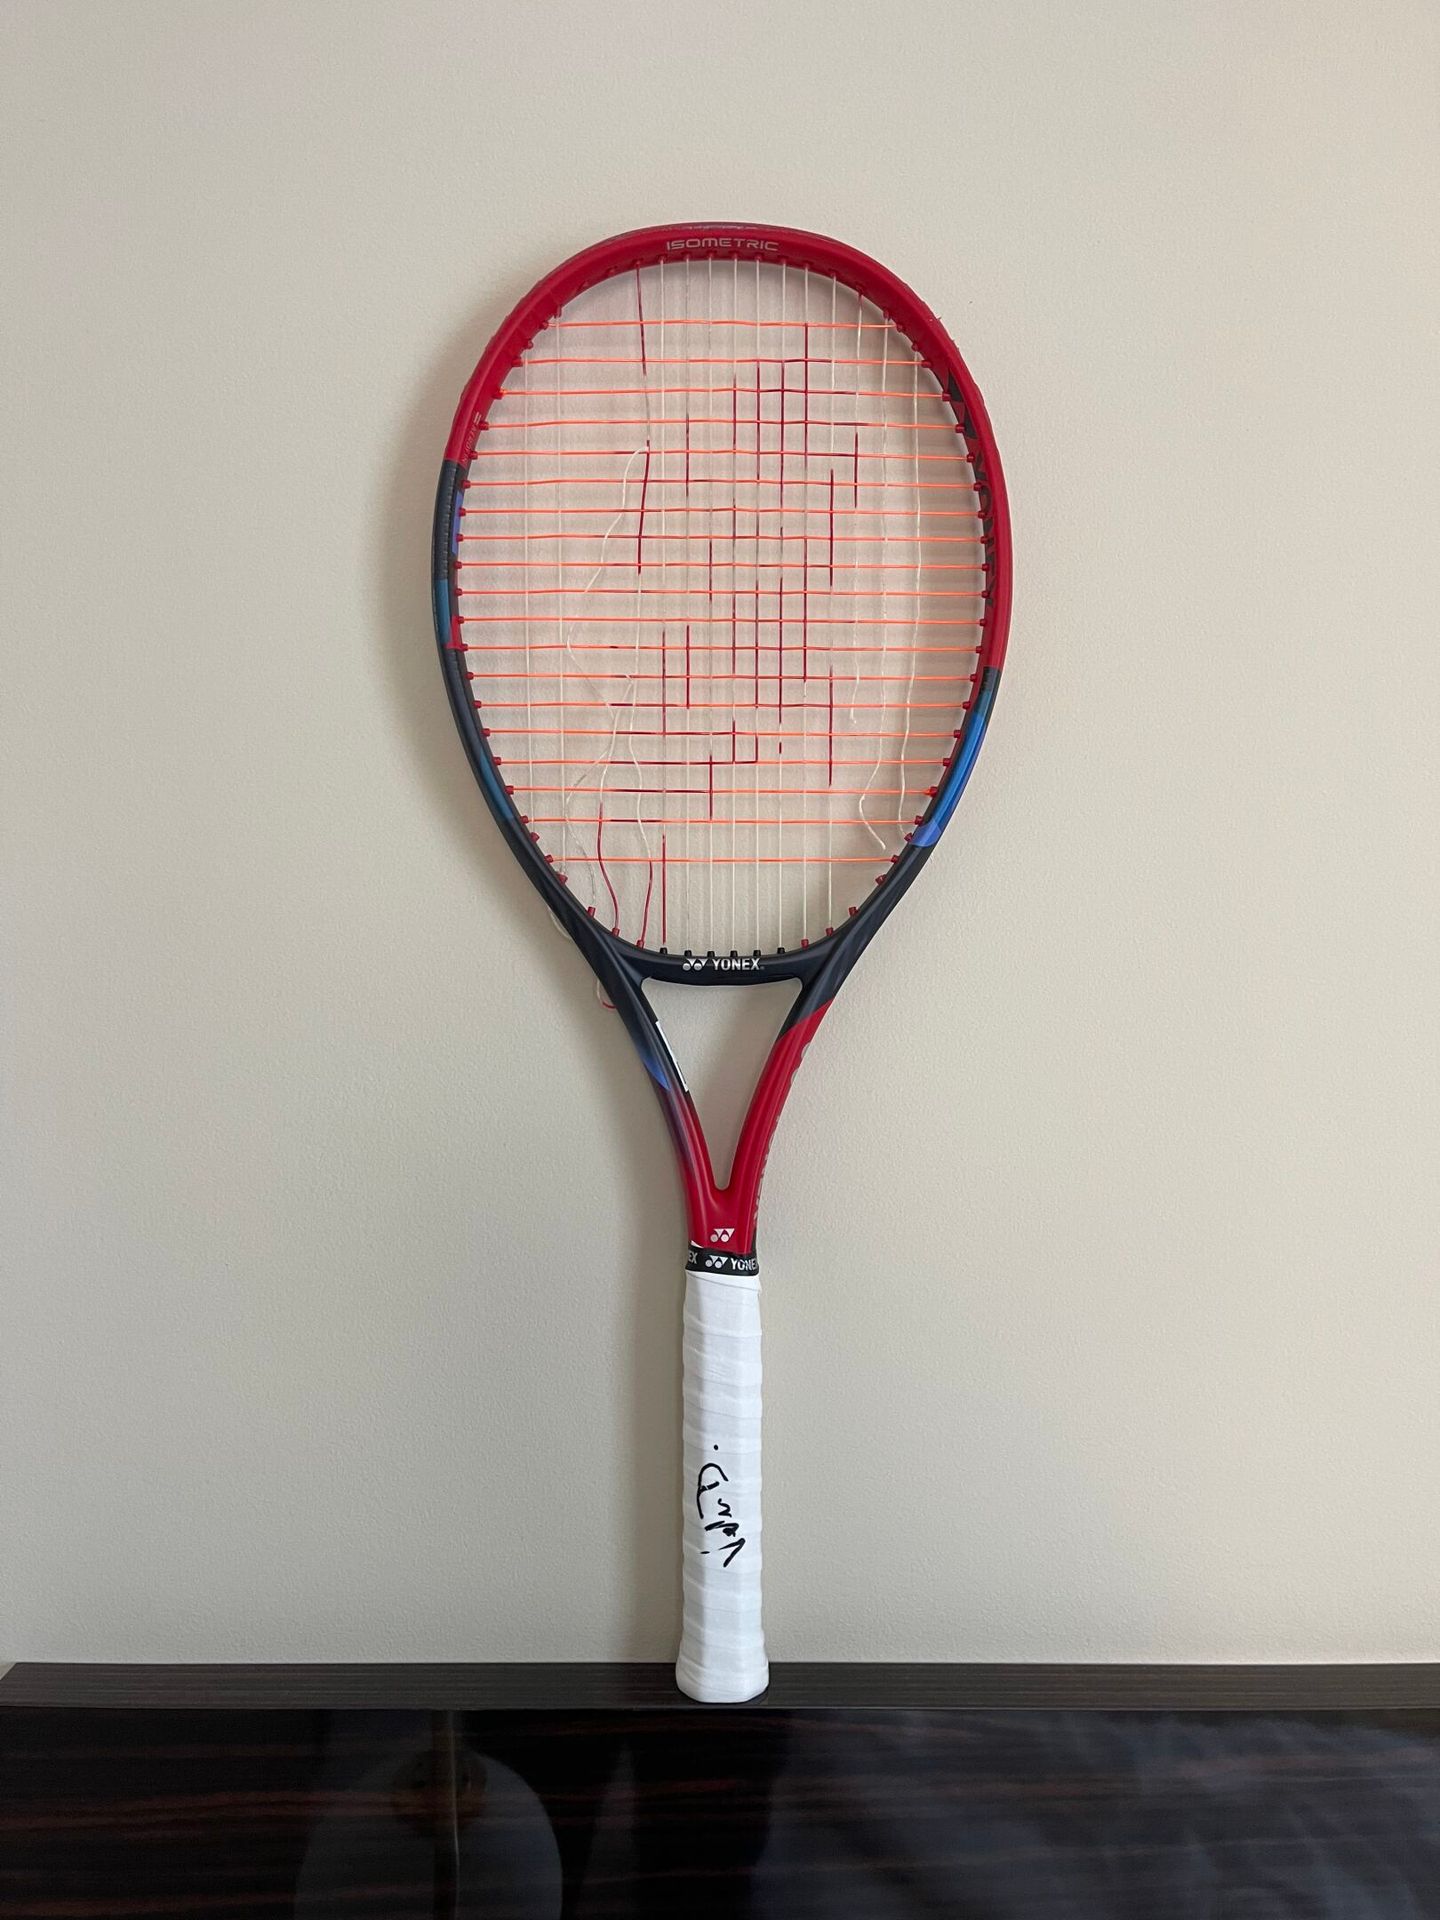 Null Yonex racket played and autographed by Donna Vekic

Note: 
- World number 1&hellip;